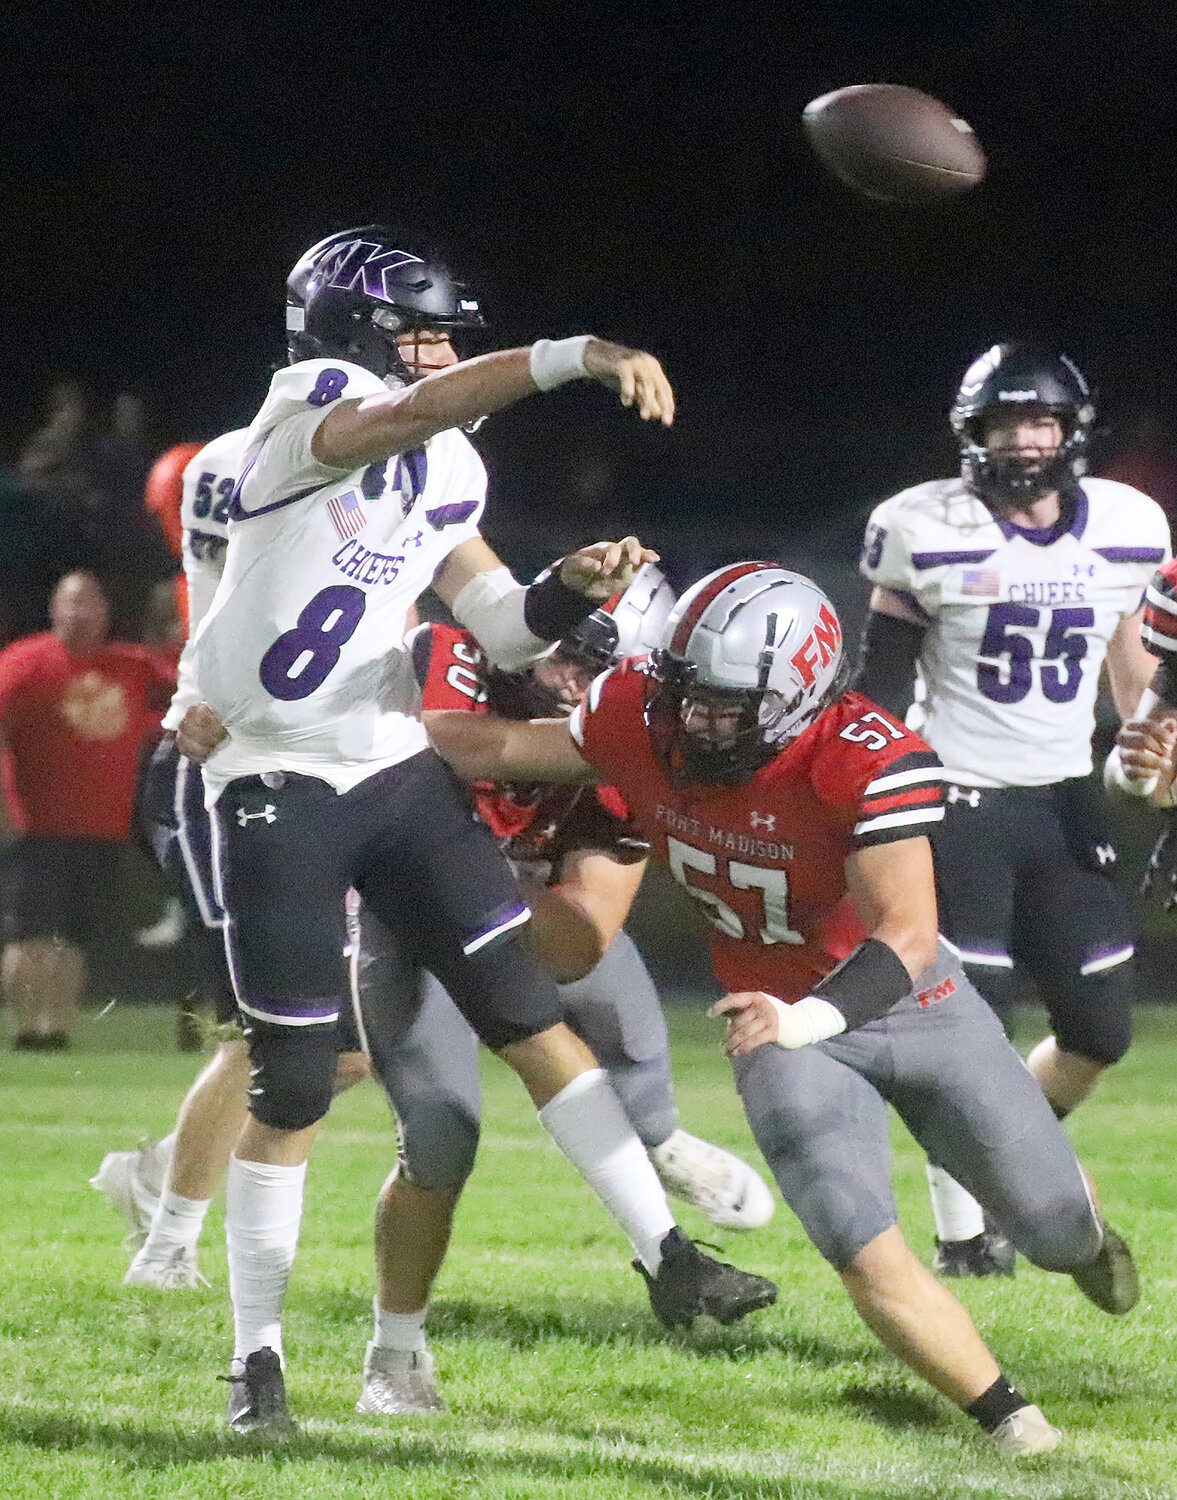 Fort Madison's Tristan Marshall just misses a sack on Keokuk's Brenton Hoard in the second quarter of the Hounds' 17-14 win Friday night in a Homecoming win at Richmond Stadium.